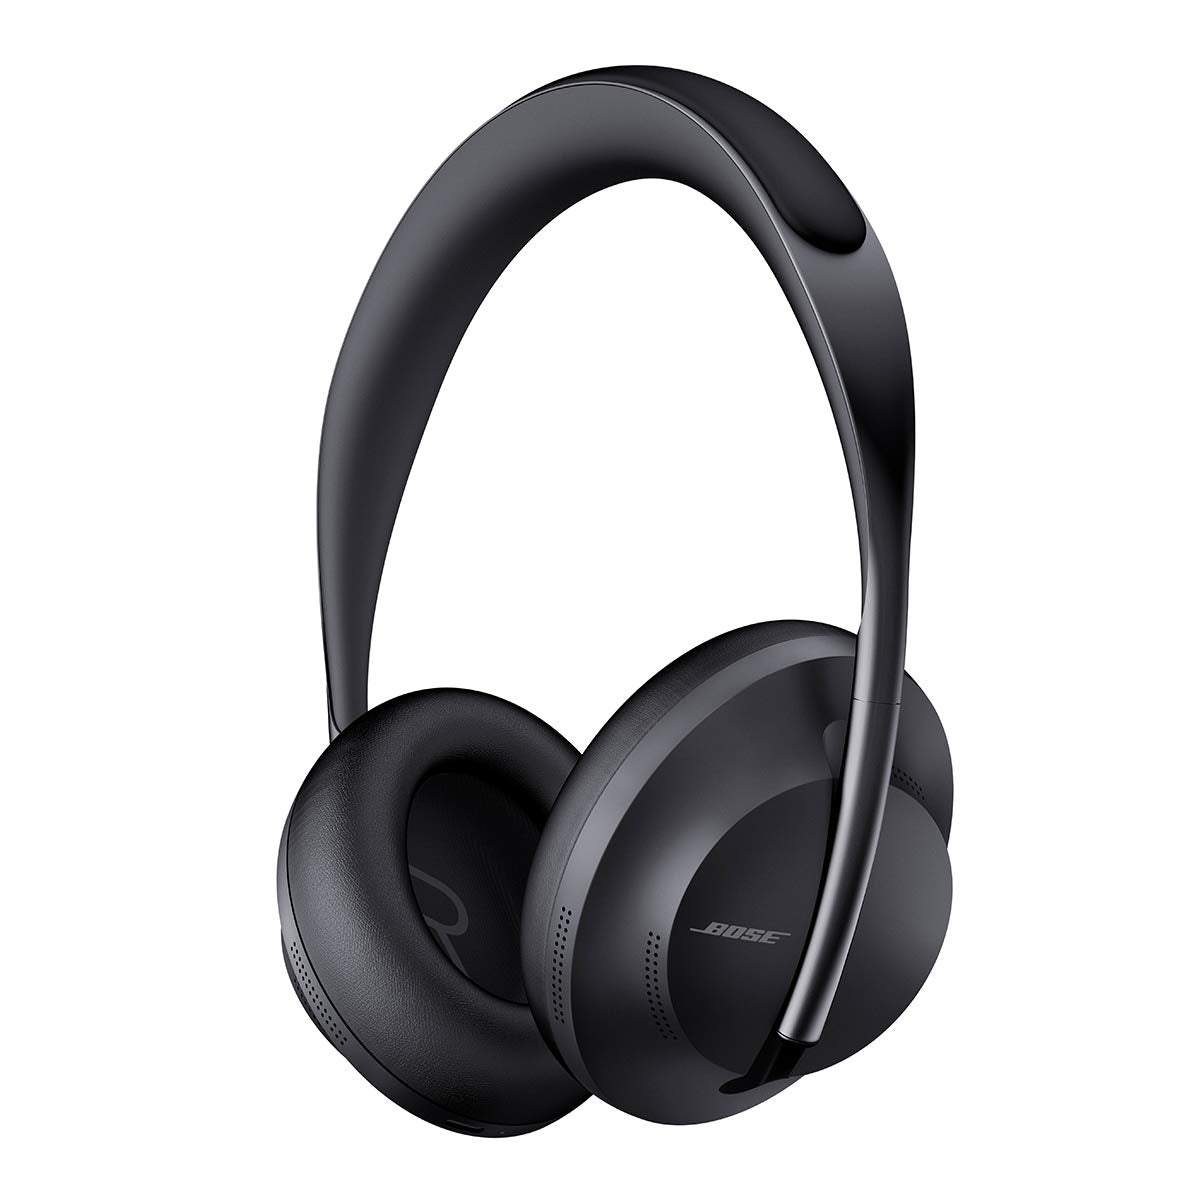 Bose NCH 700 - Noise Cancelling Headphones